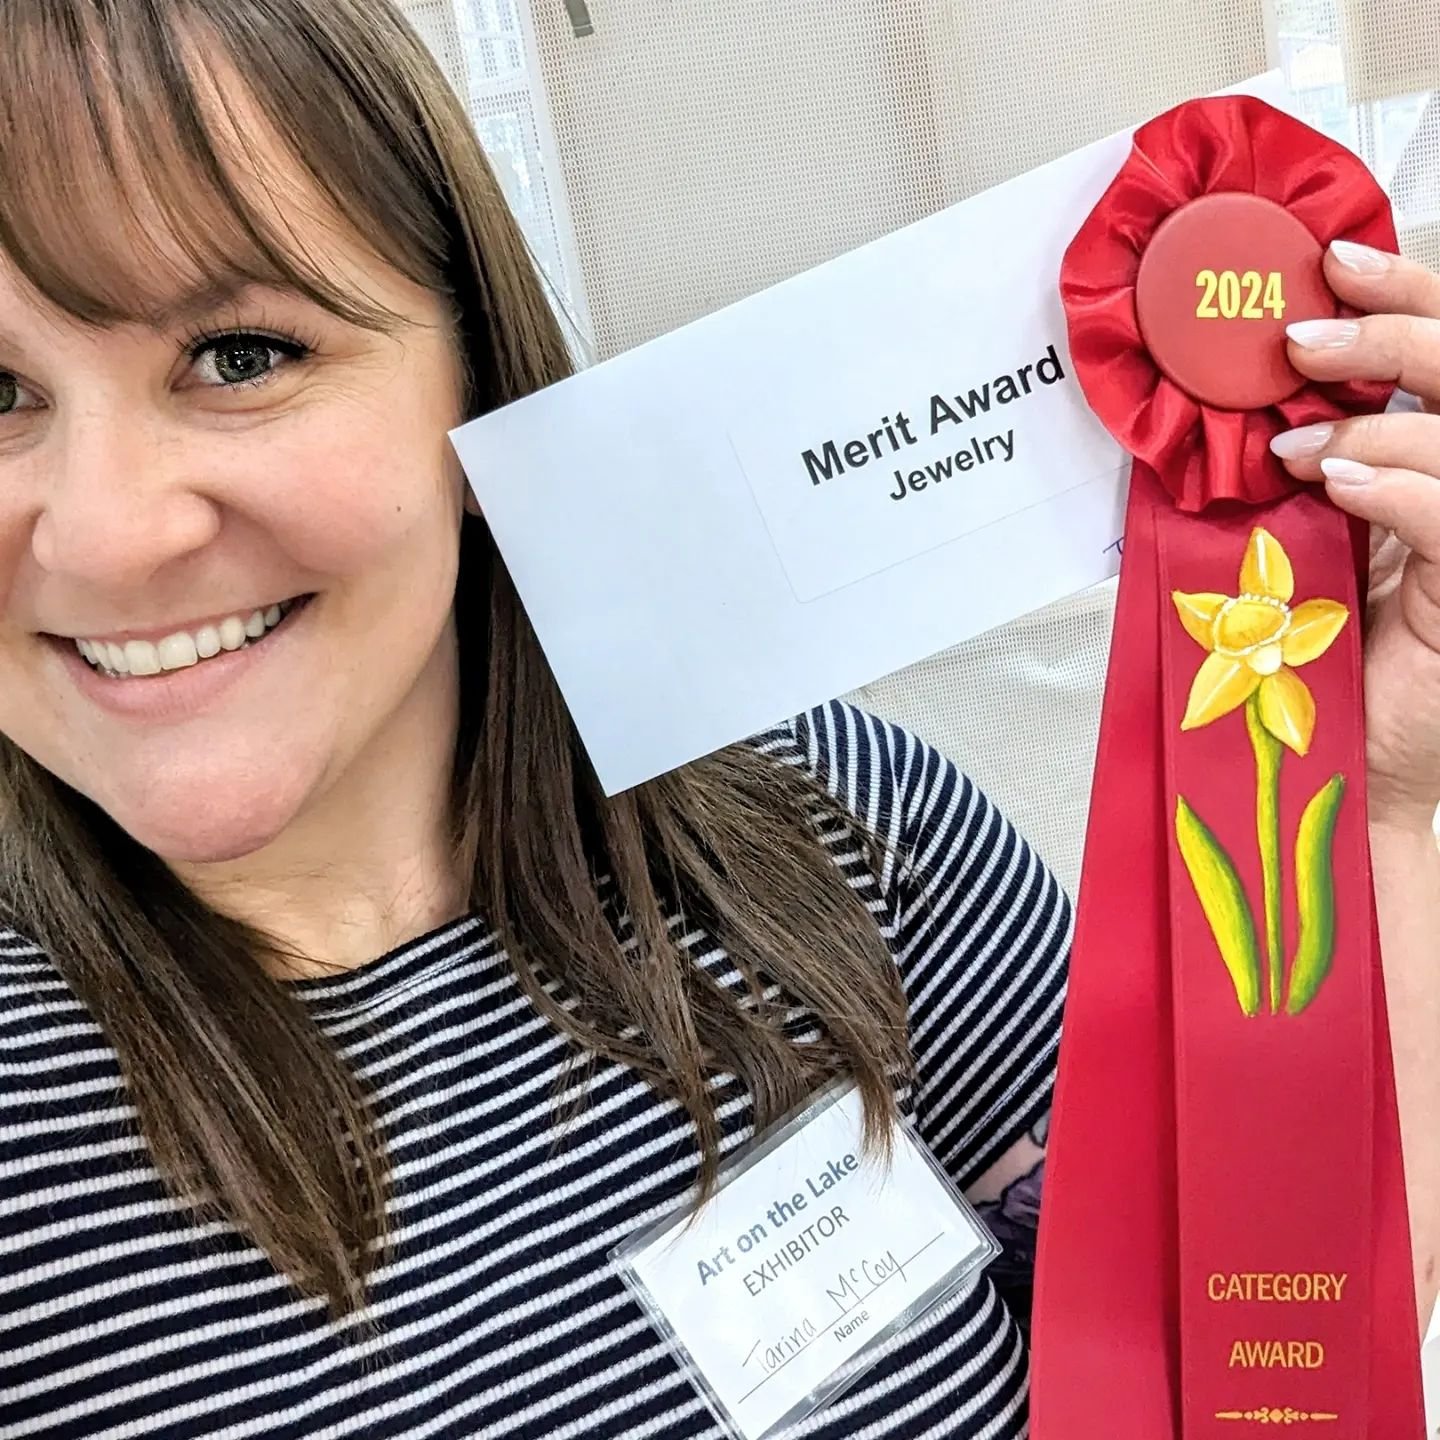 I want to make sure this is documented because I am proud of it!
I just won in the jewelry category at the event this weekend! 
This is HUGE!! (to me personally especially!)

There are so many jewelry artists here at this event and each one of us off